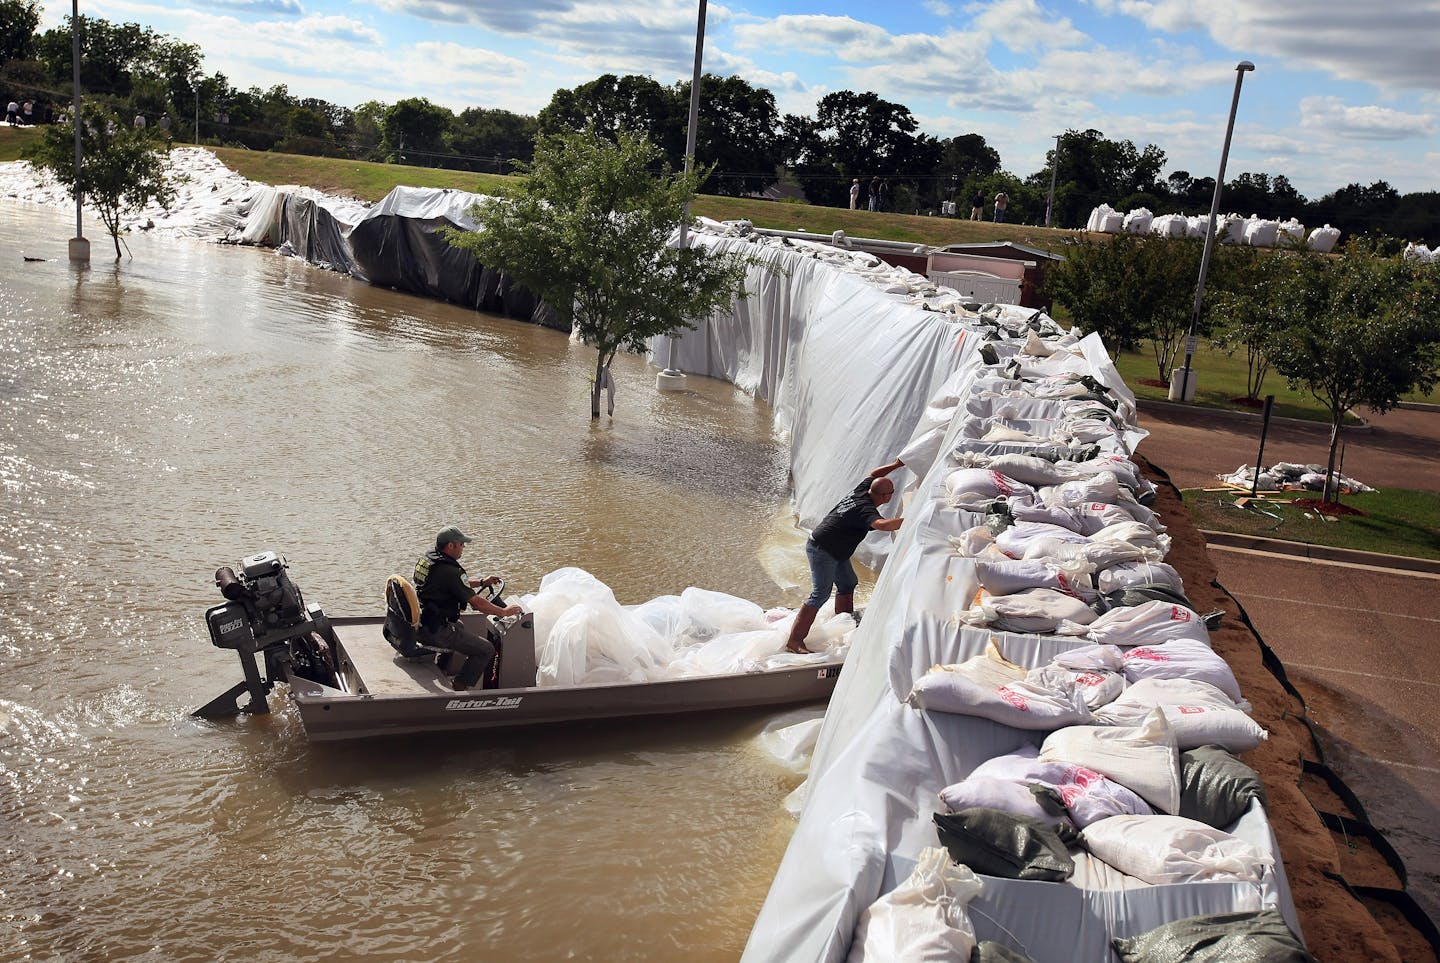 A man in a boat peers under sheeting along a level. The river side is higher than the dry side across the levee.